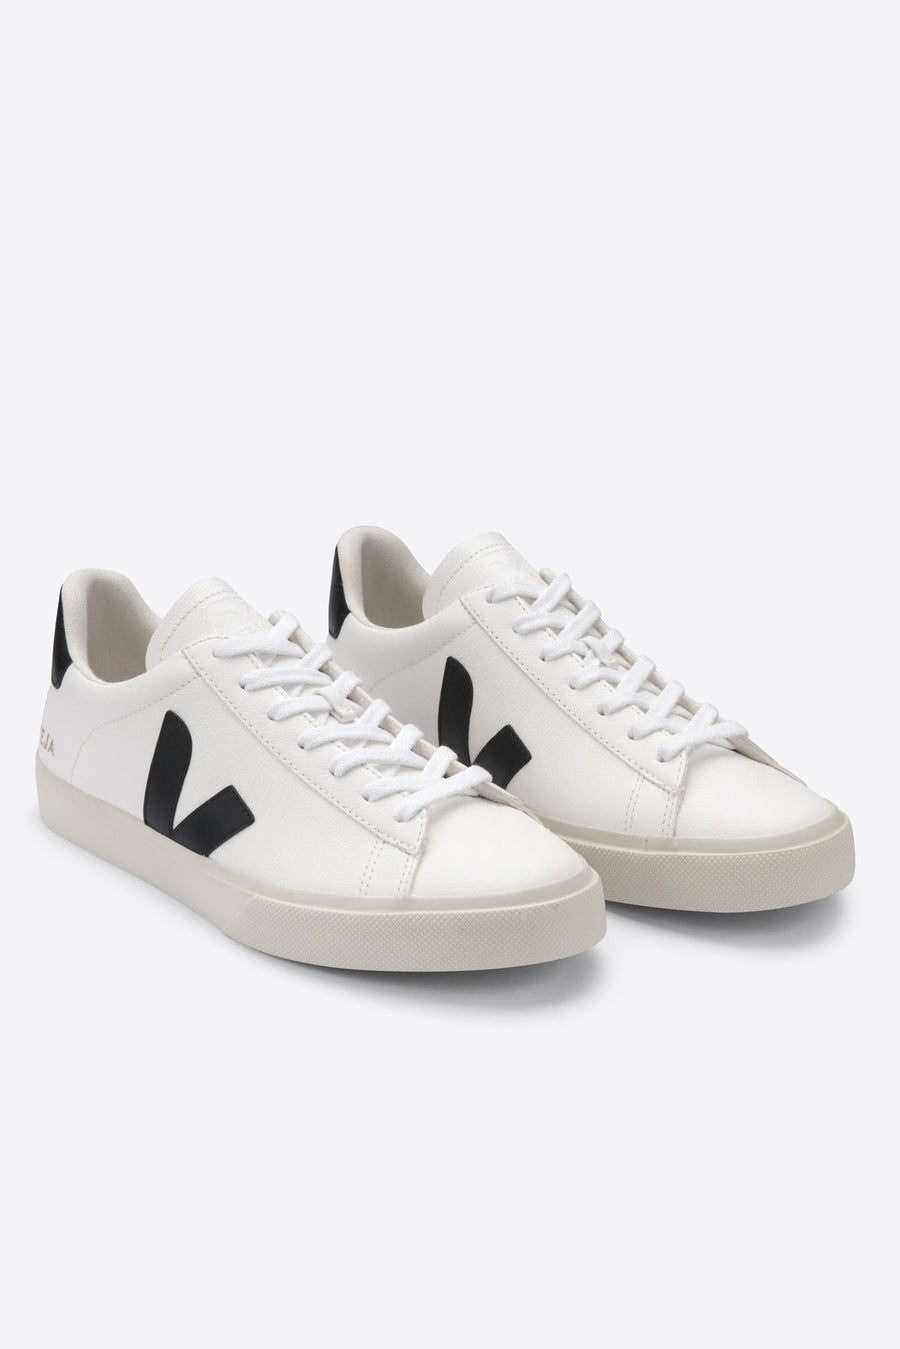 Veja Campo Sneaker - White and Black– Amour Vert